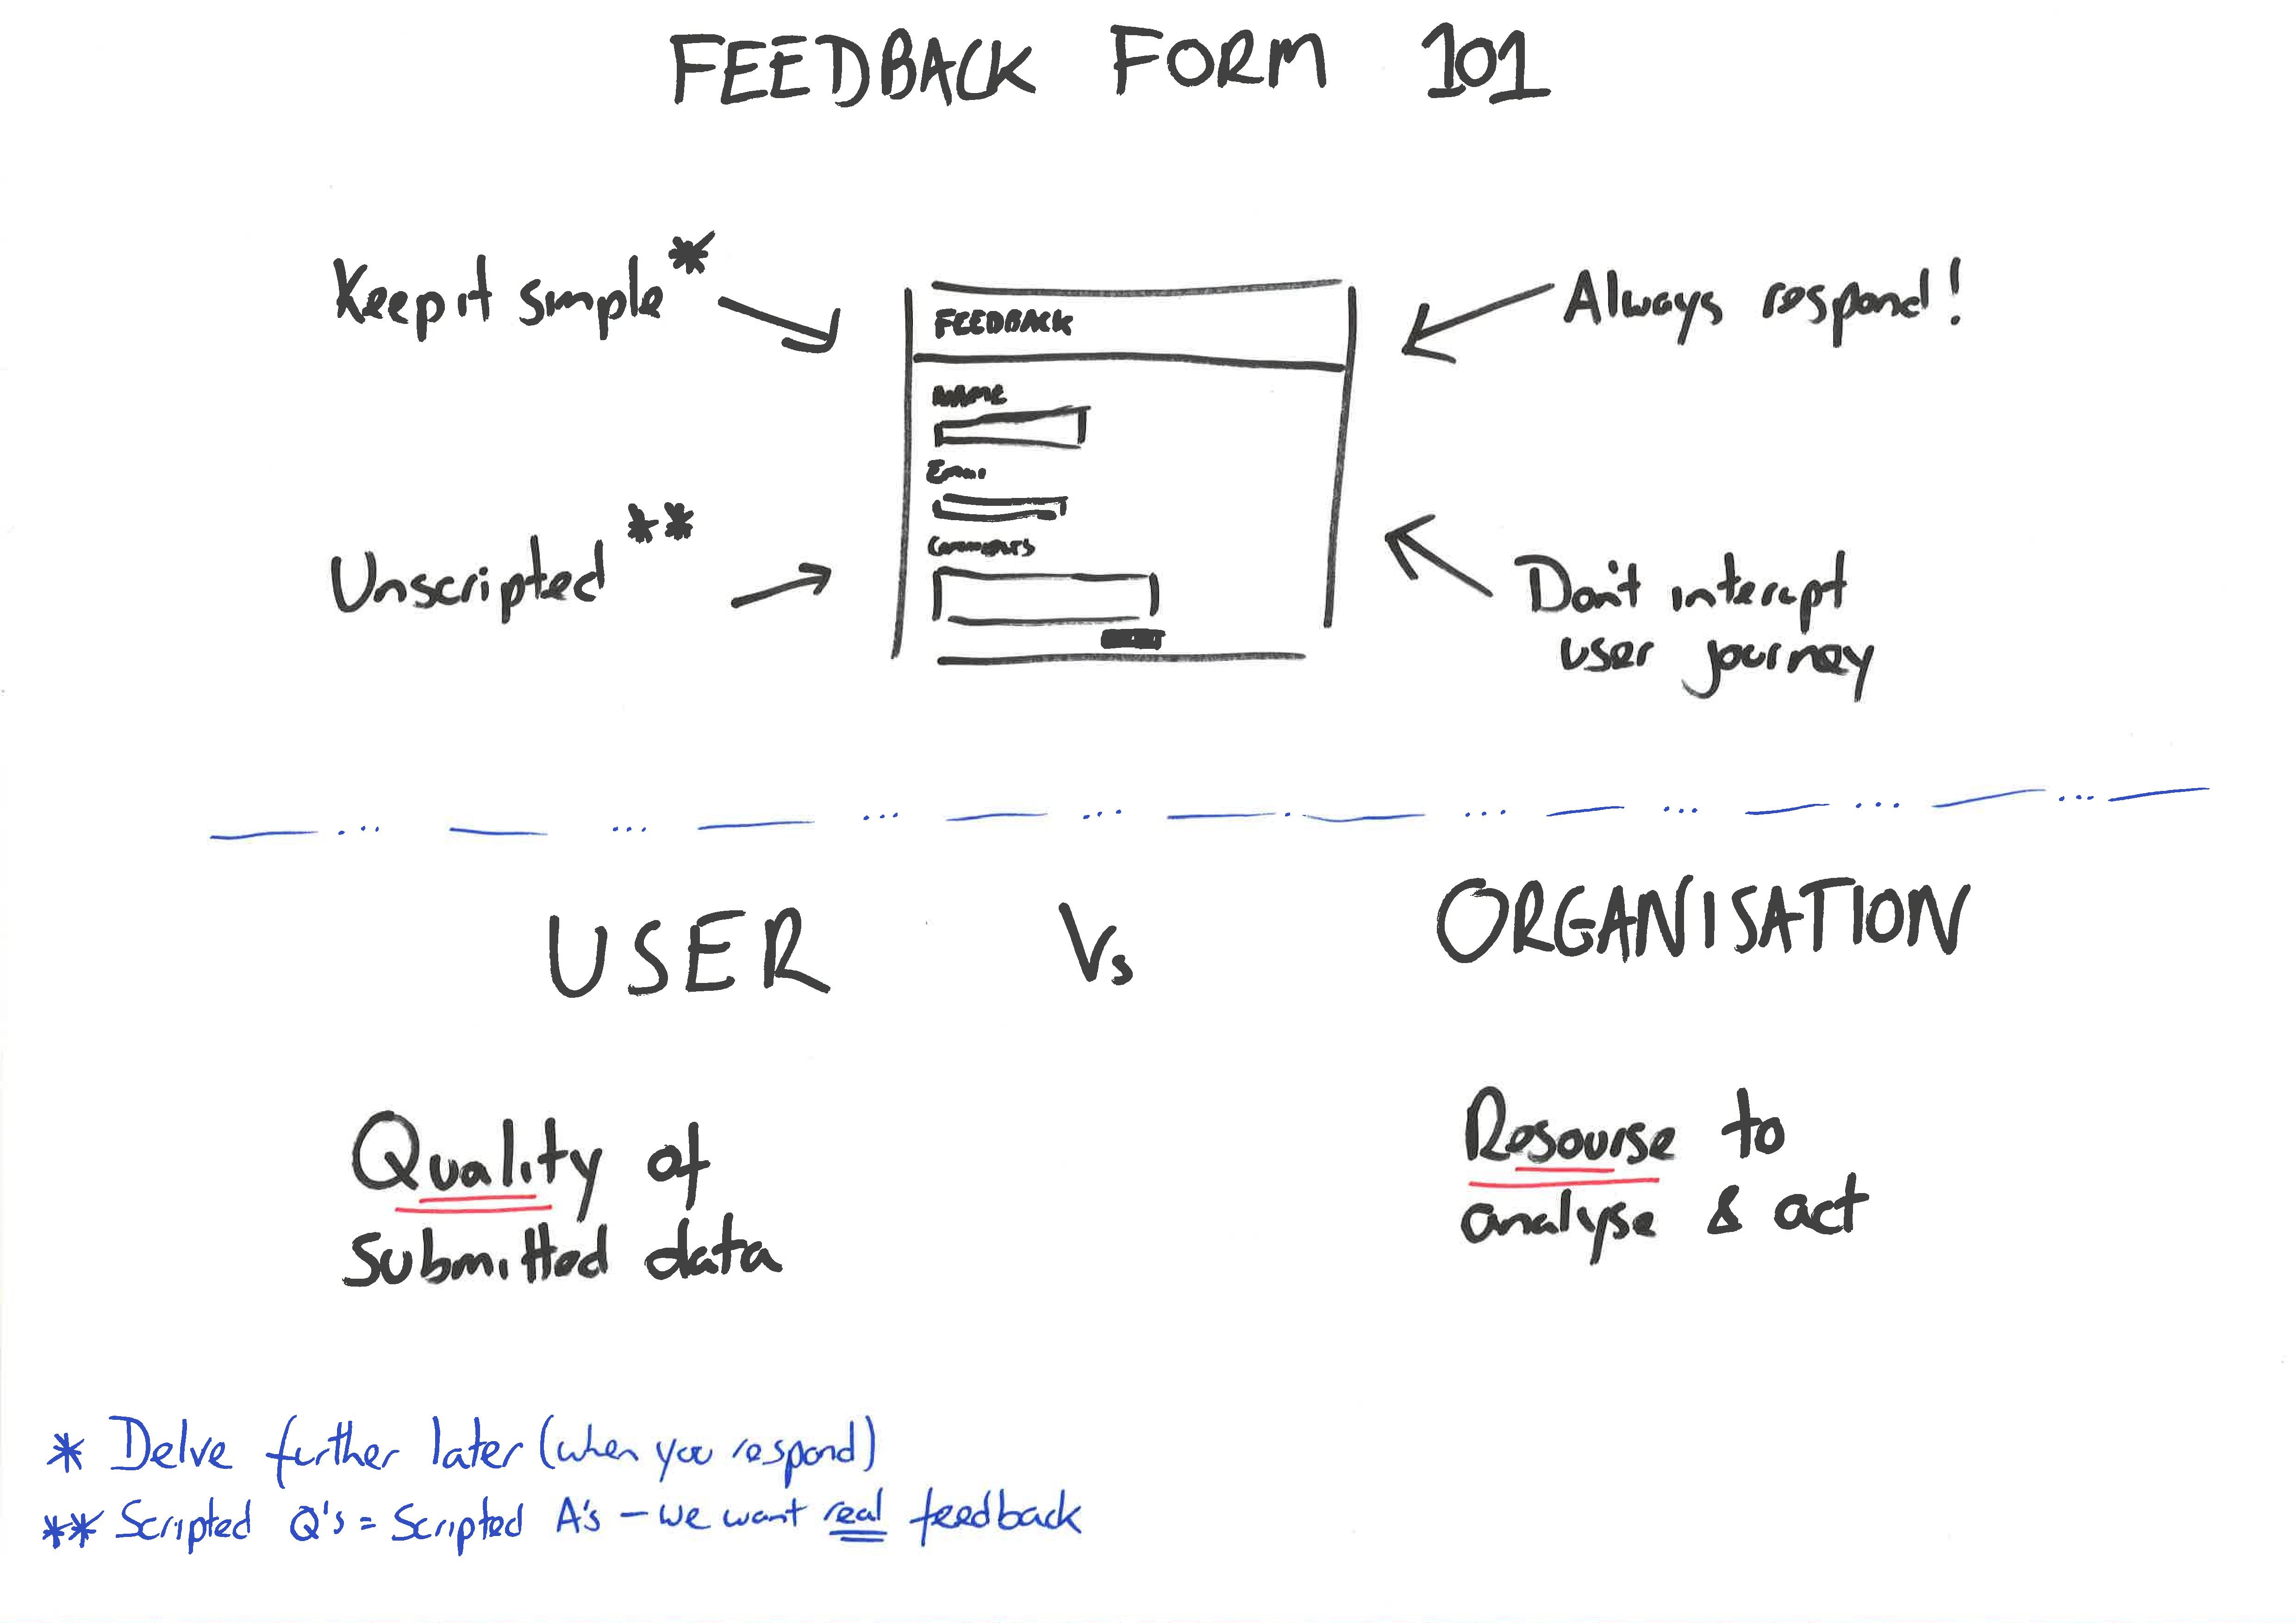 Feedback Form Design – Improve usability and (conversion rate)